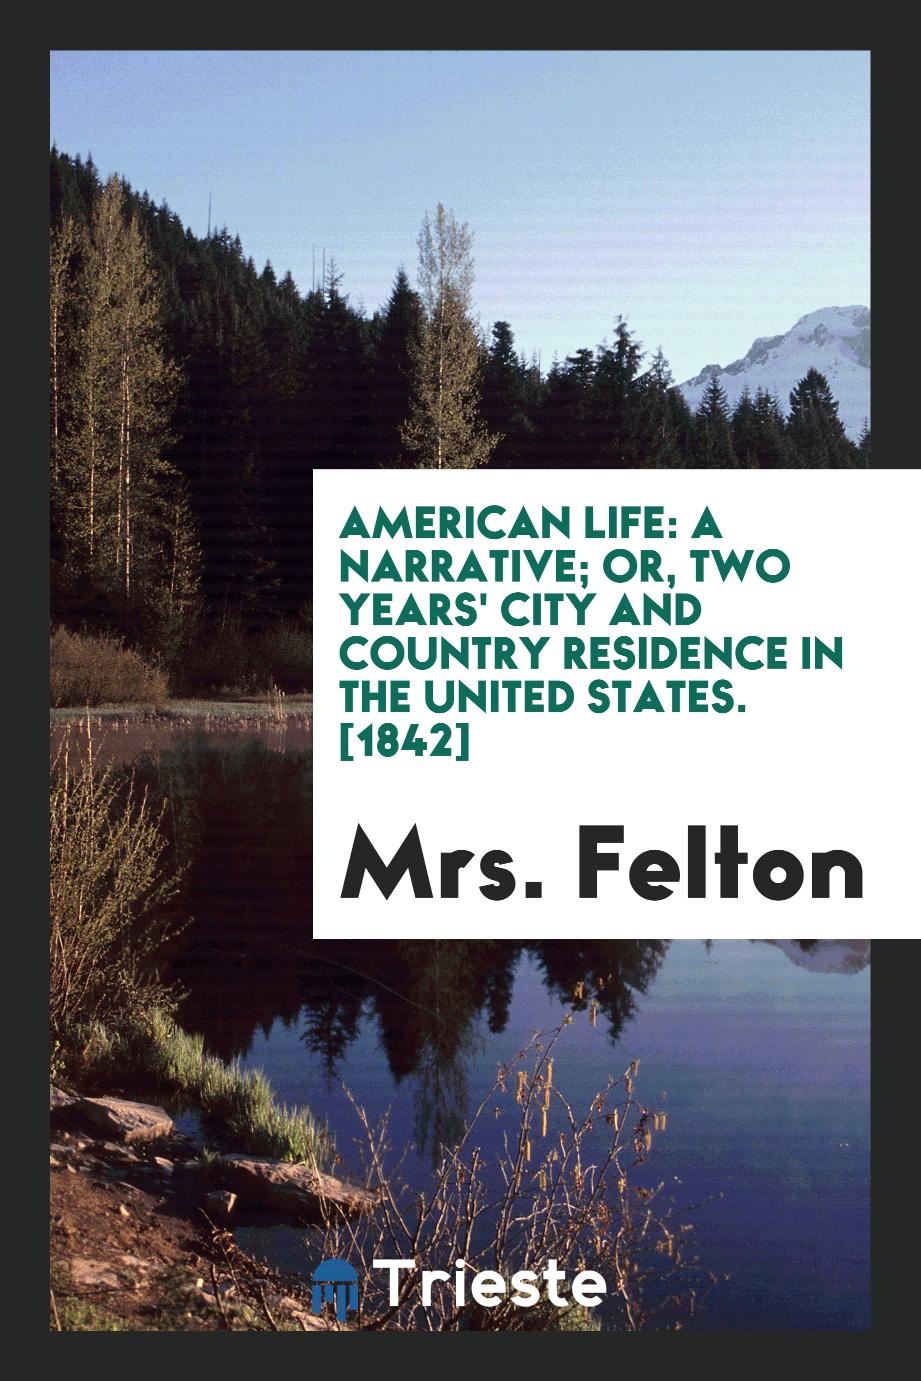 American Life: A Narrative; Or, Two Years' City and Country Residence in the United States. [1842]